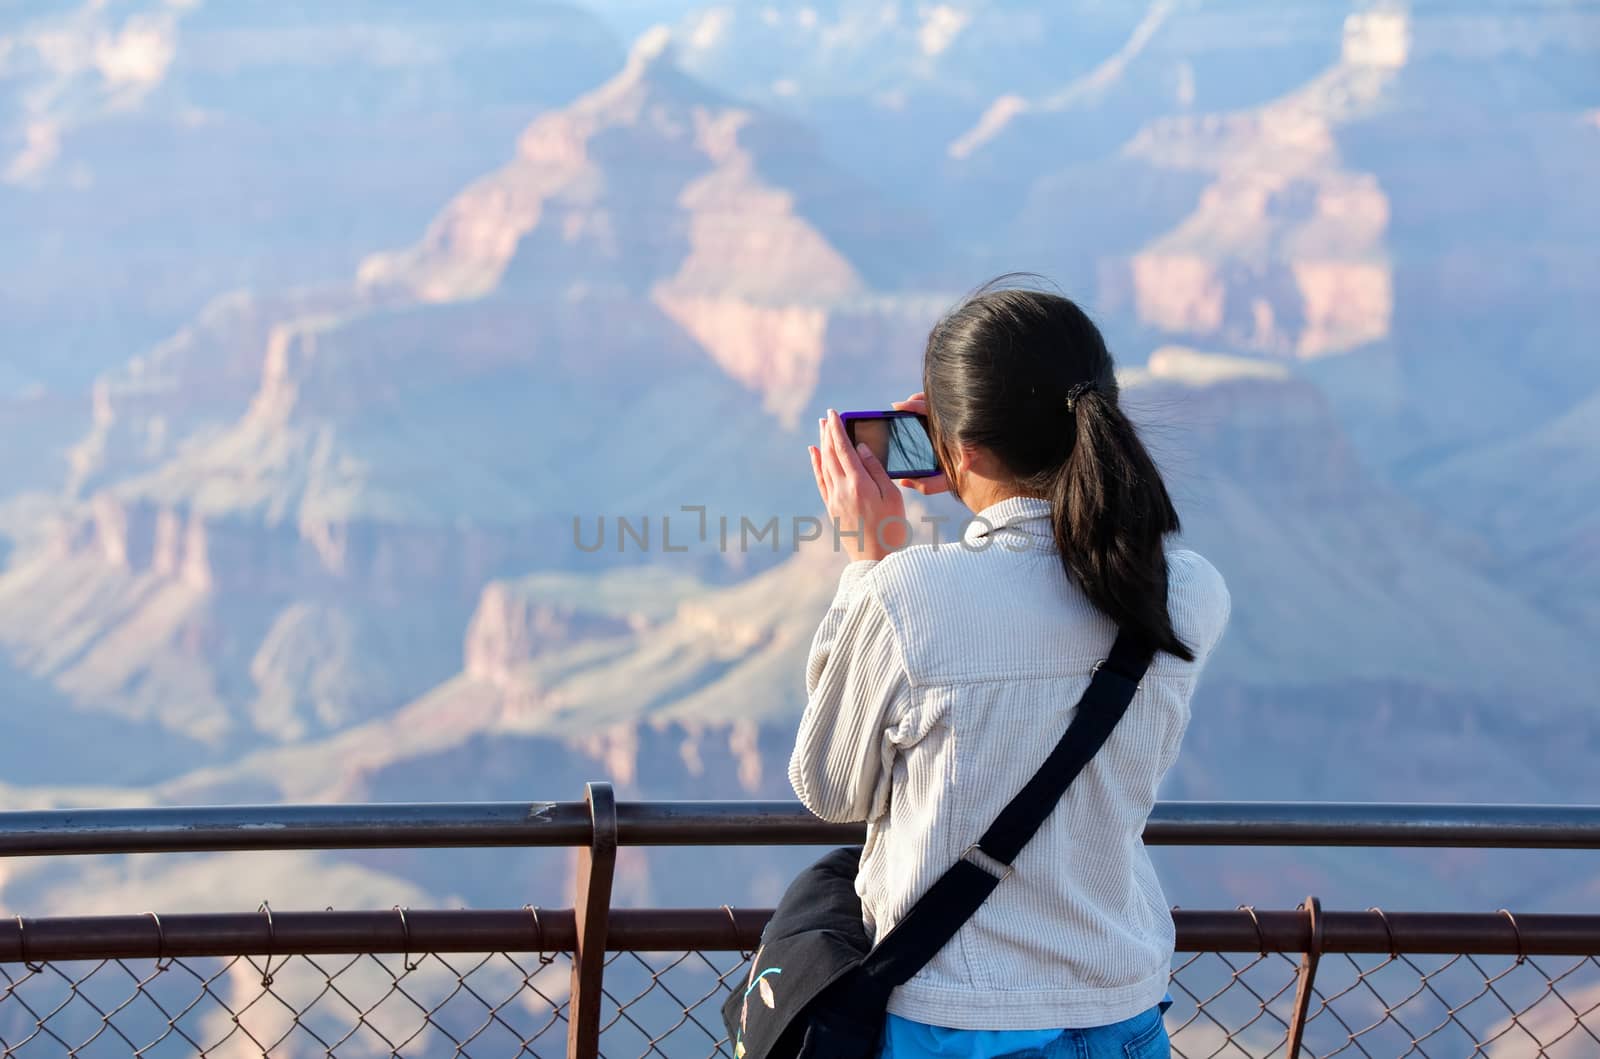 Young teen girl with pony tail standing at railing taking pictures at Grand Canyon, Arizona